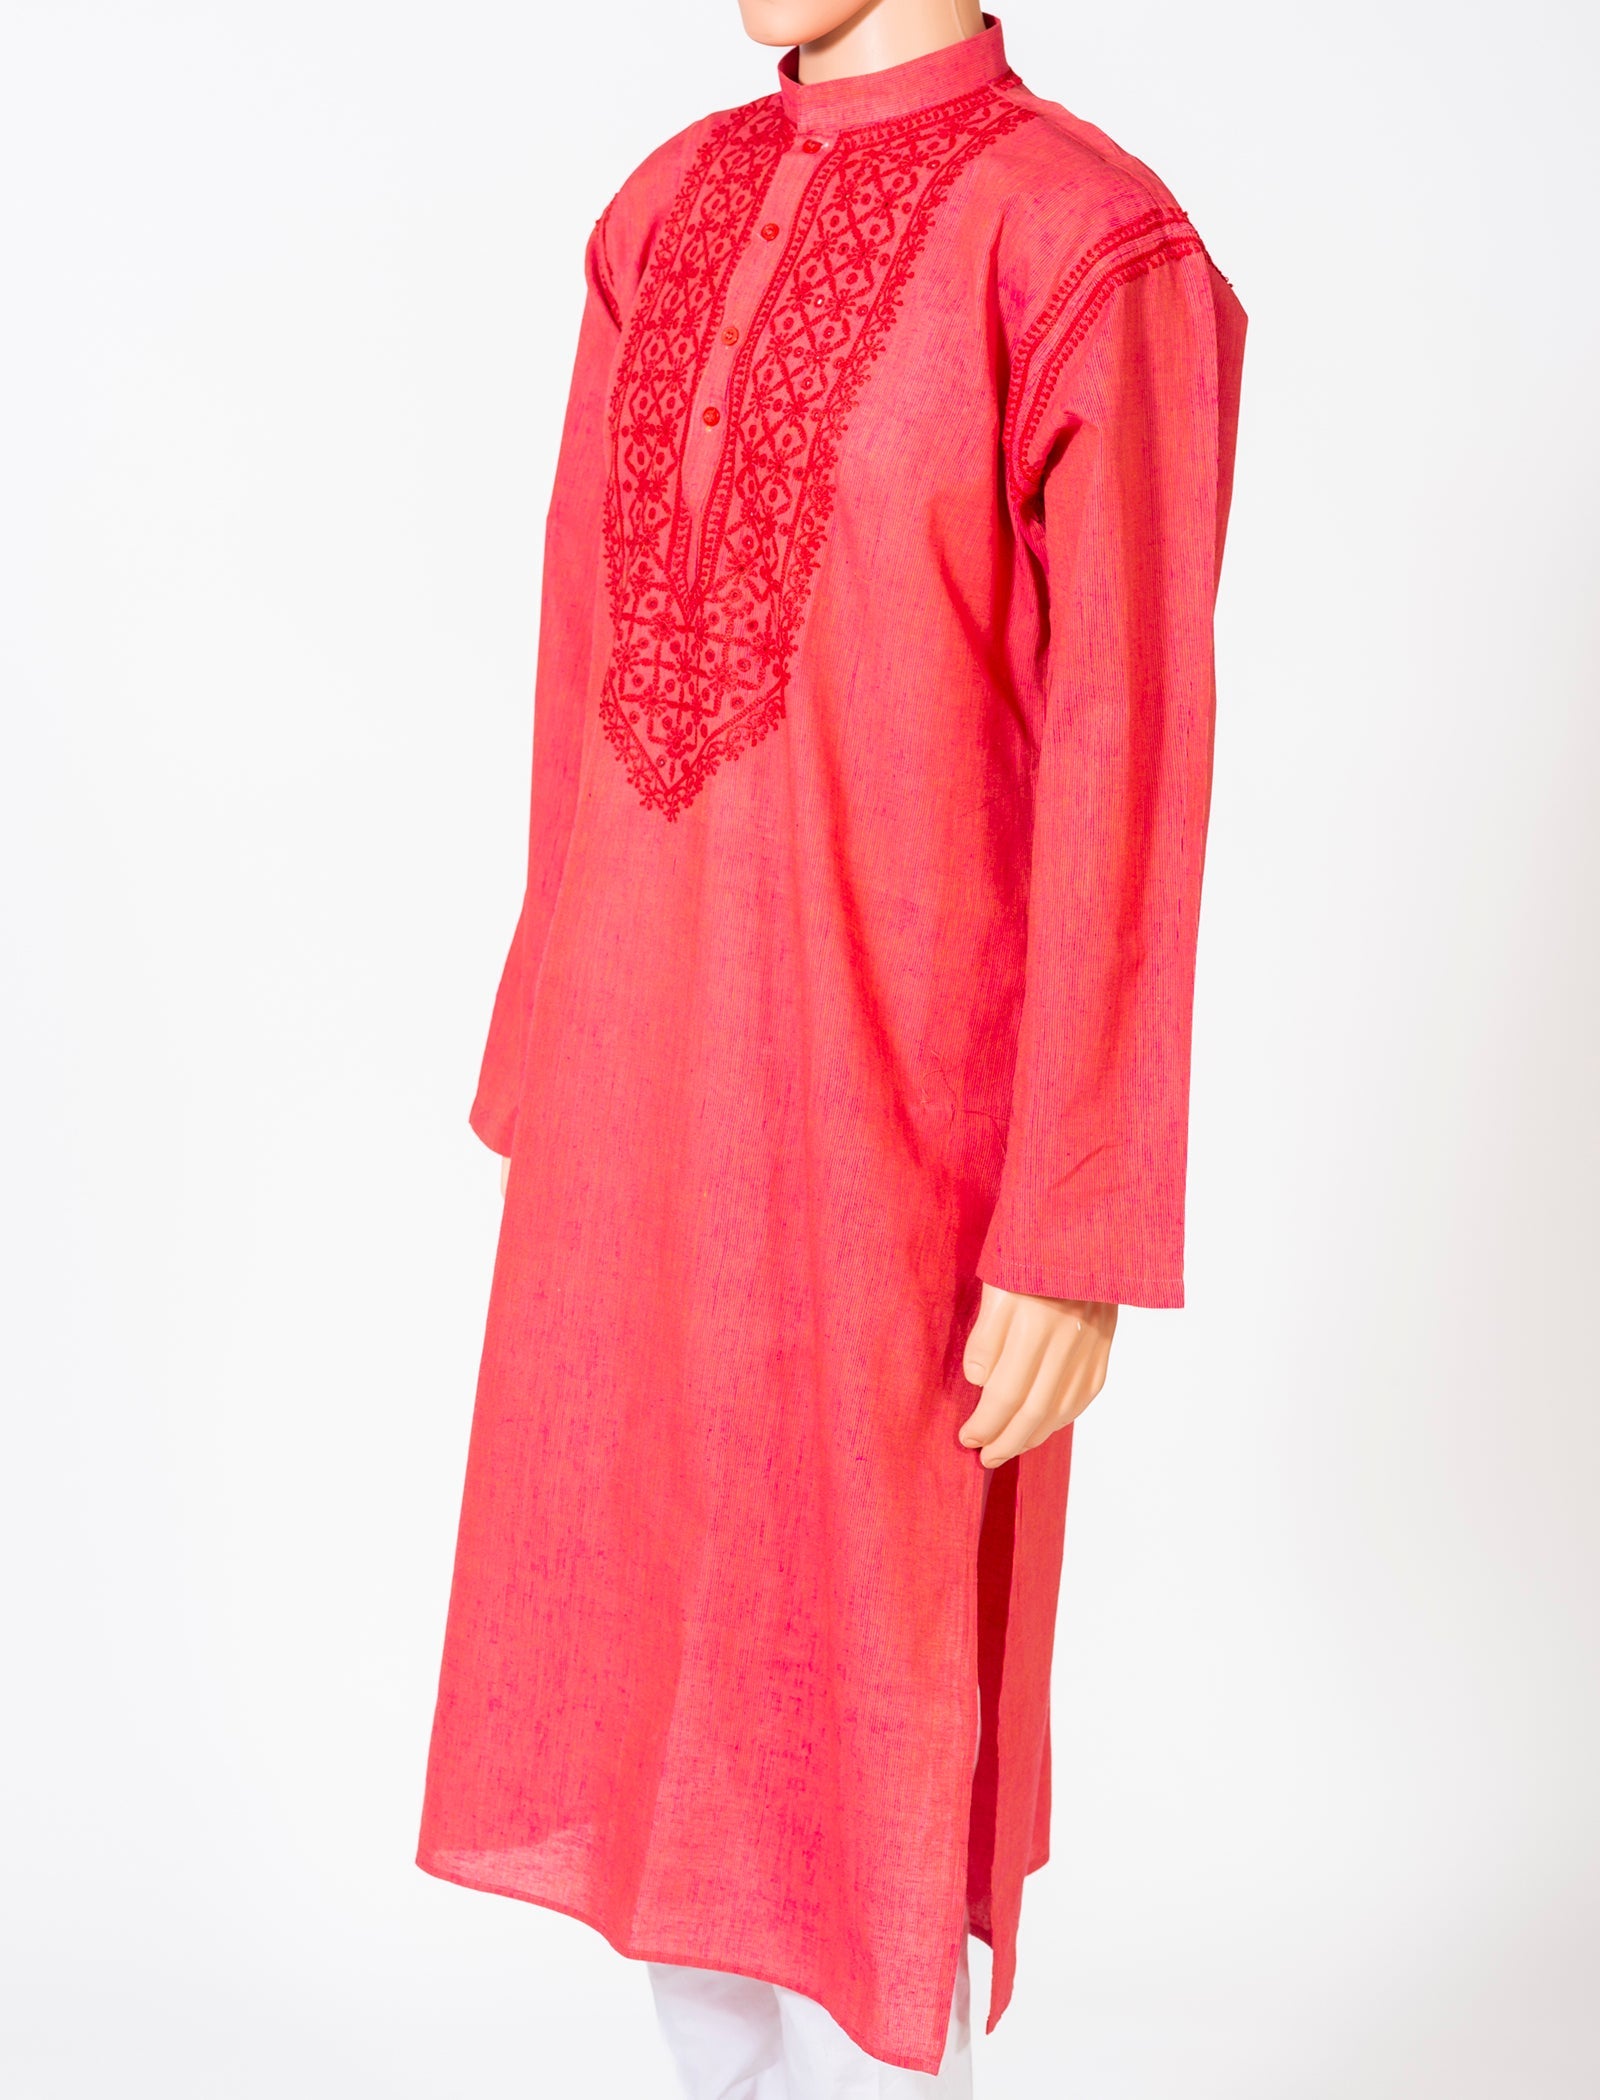 Lucknow Chikan Emporium Cotton Red Colour Gents Kurta With Self Stripes And Fancy Hand Chikankari On Neck.